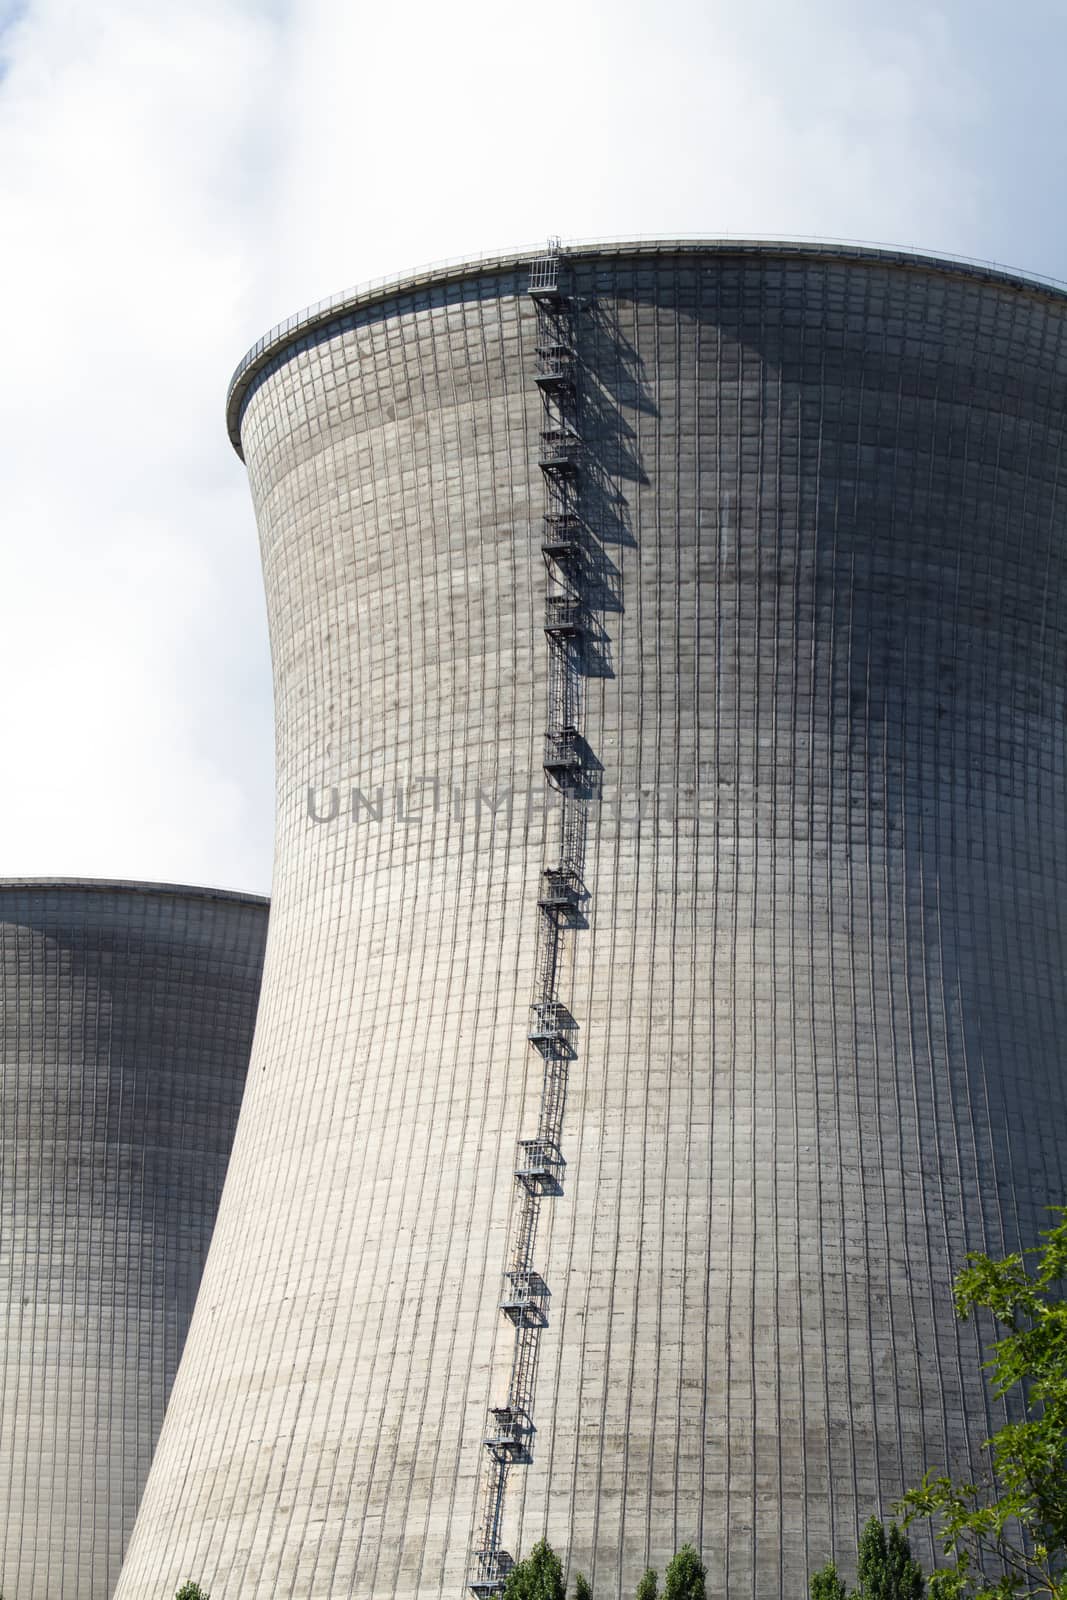 A nuclear power station chimney